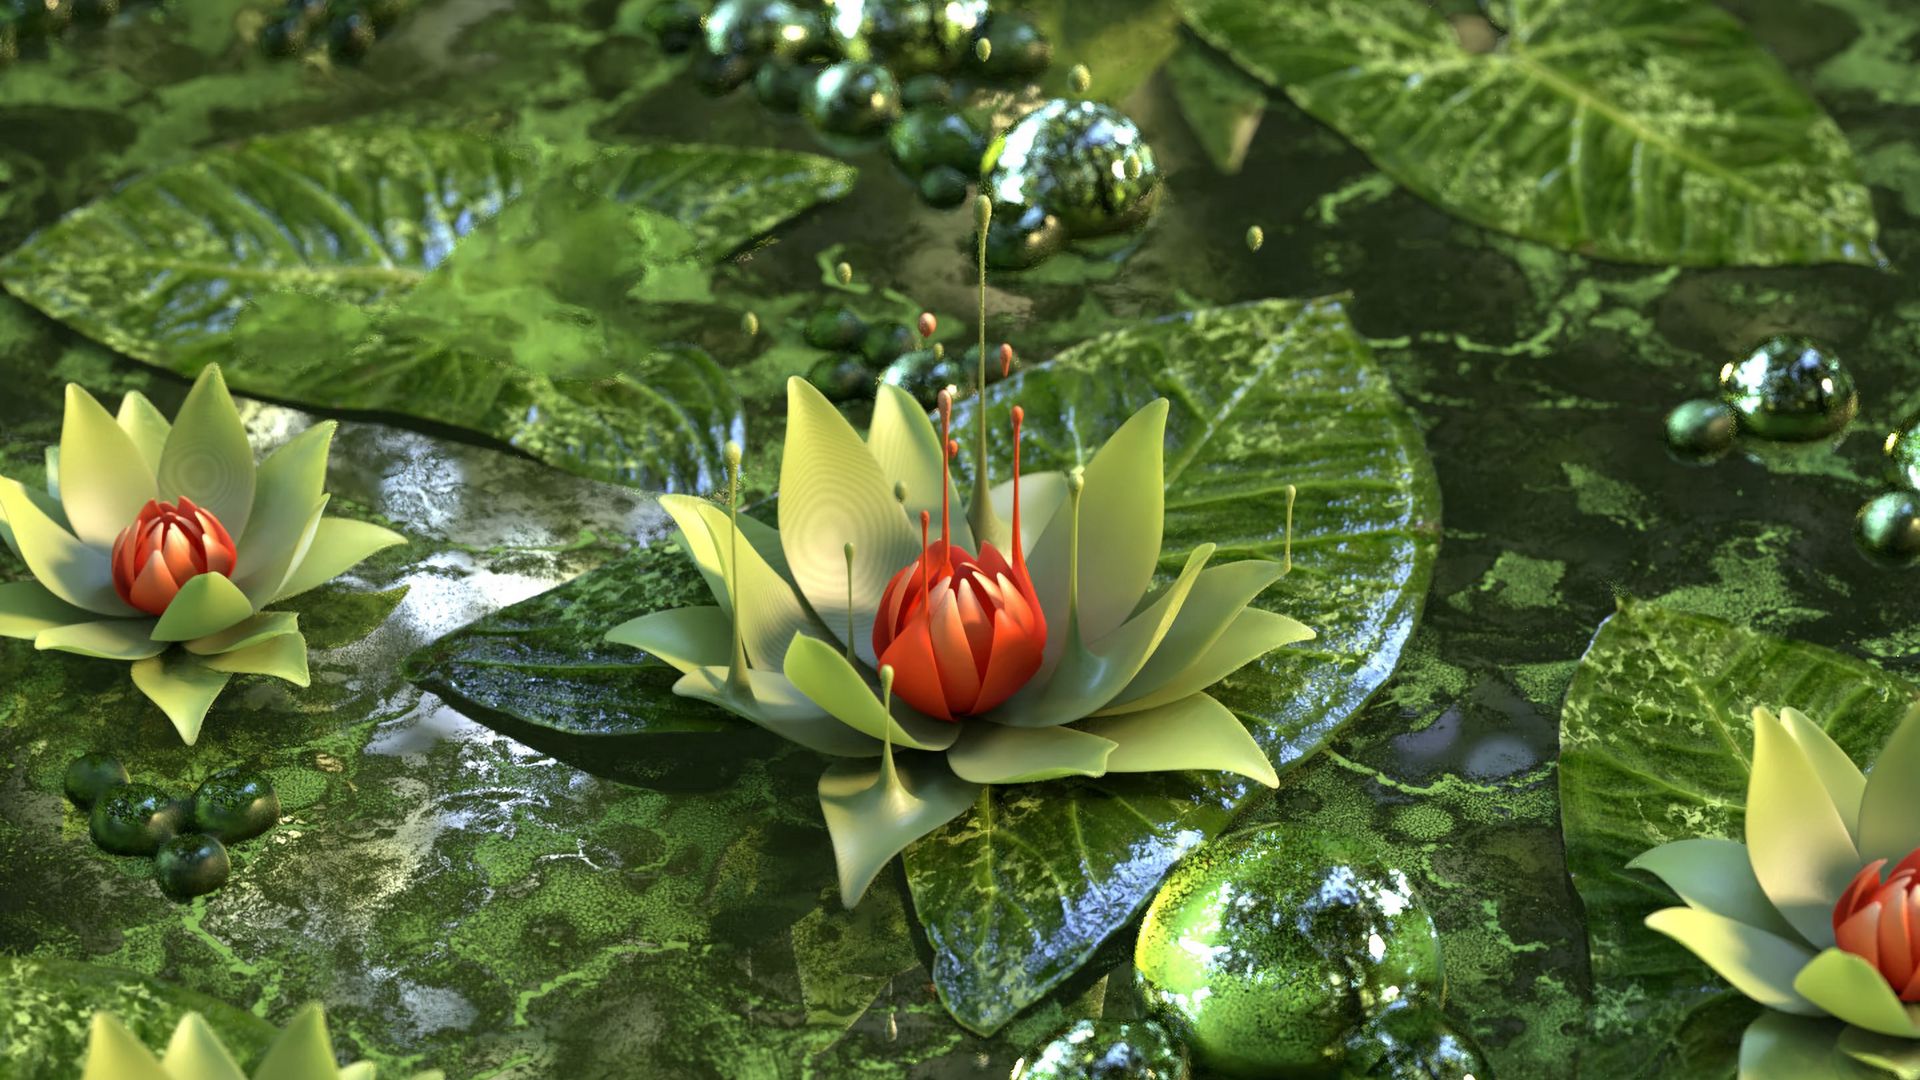 Download wallpaper 1920x1080 water lily, lotus, flower, green full hd,  hdtv, fhd, 1080p hd background